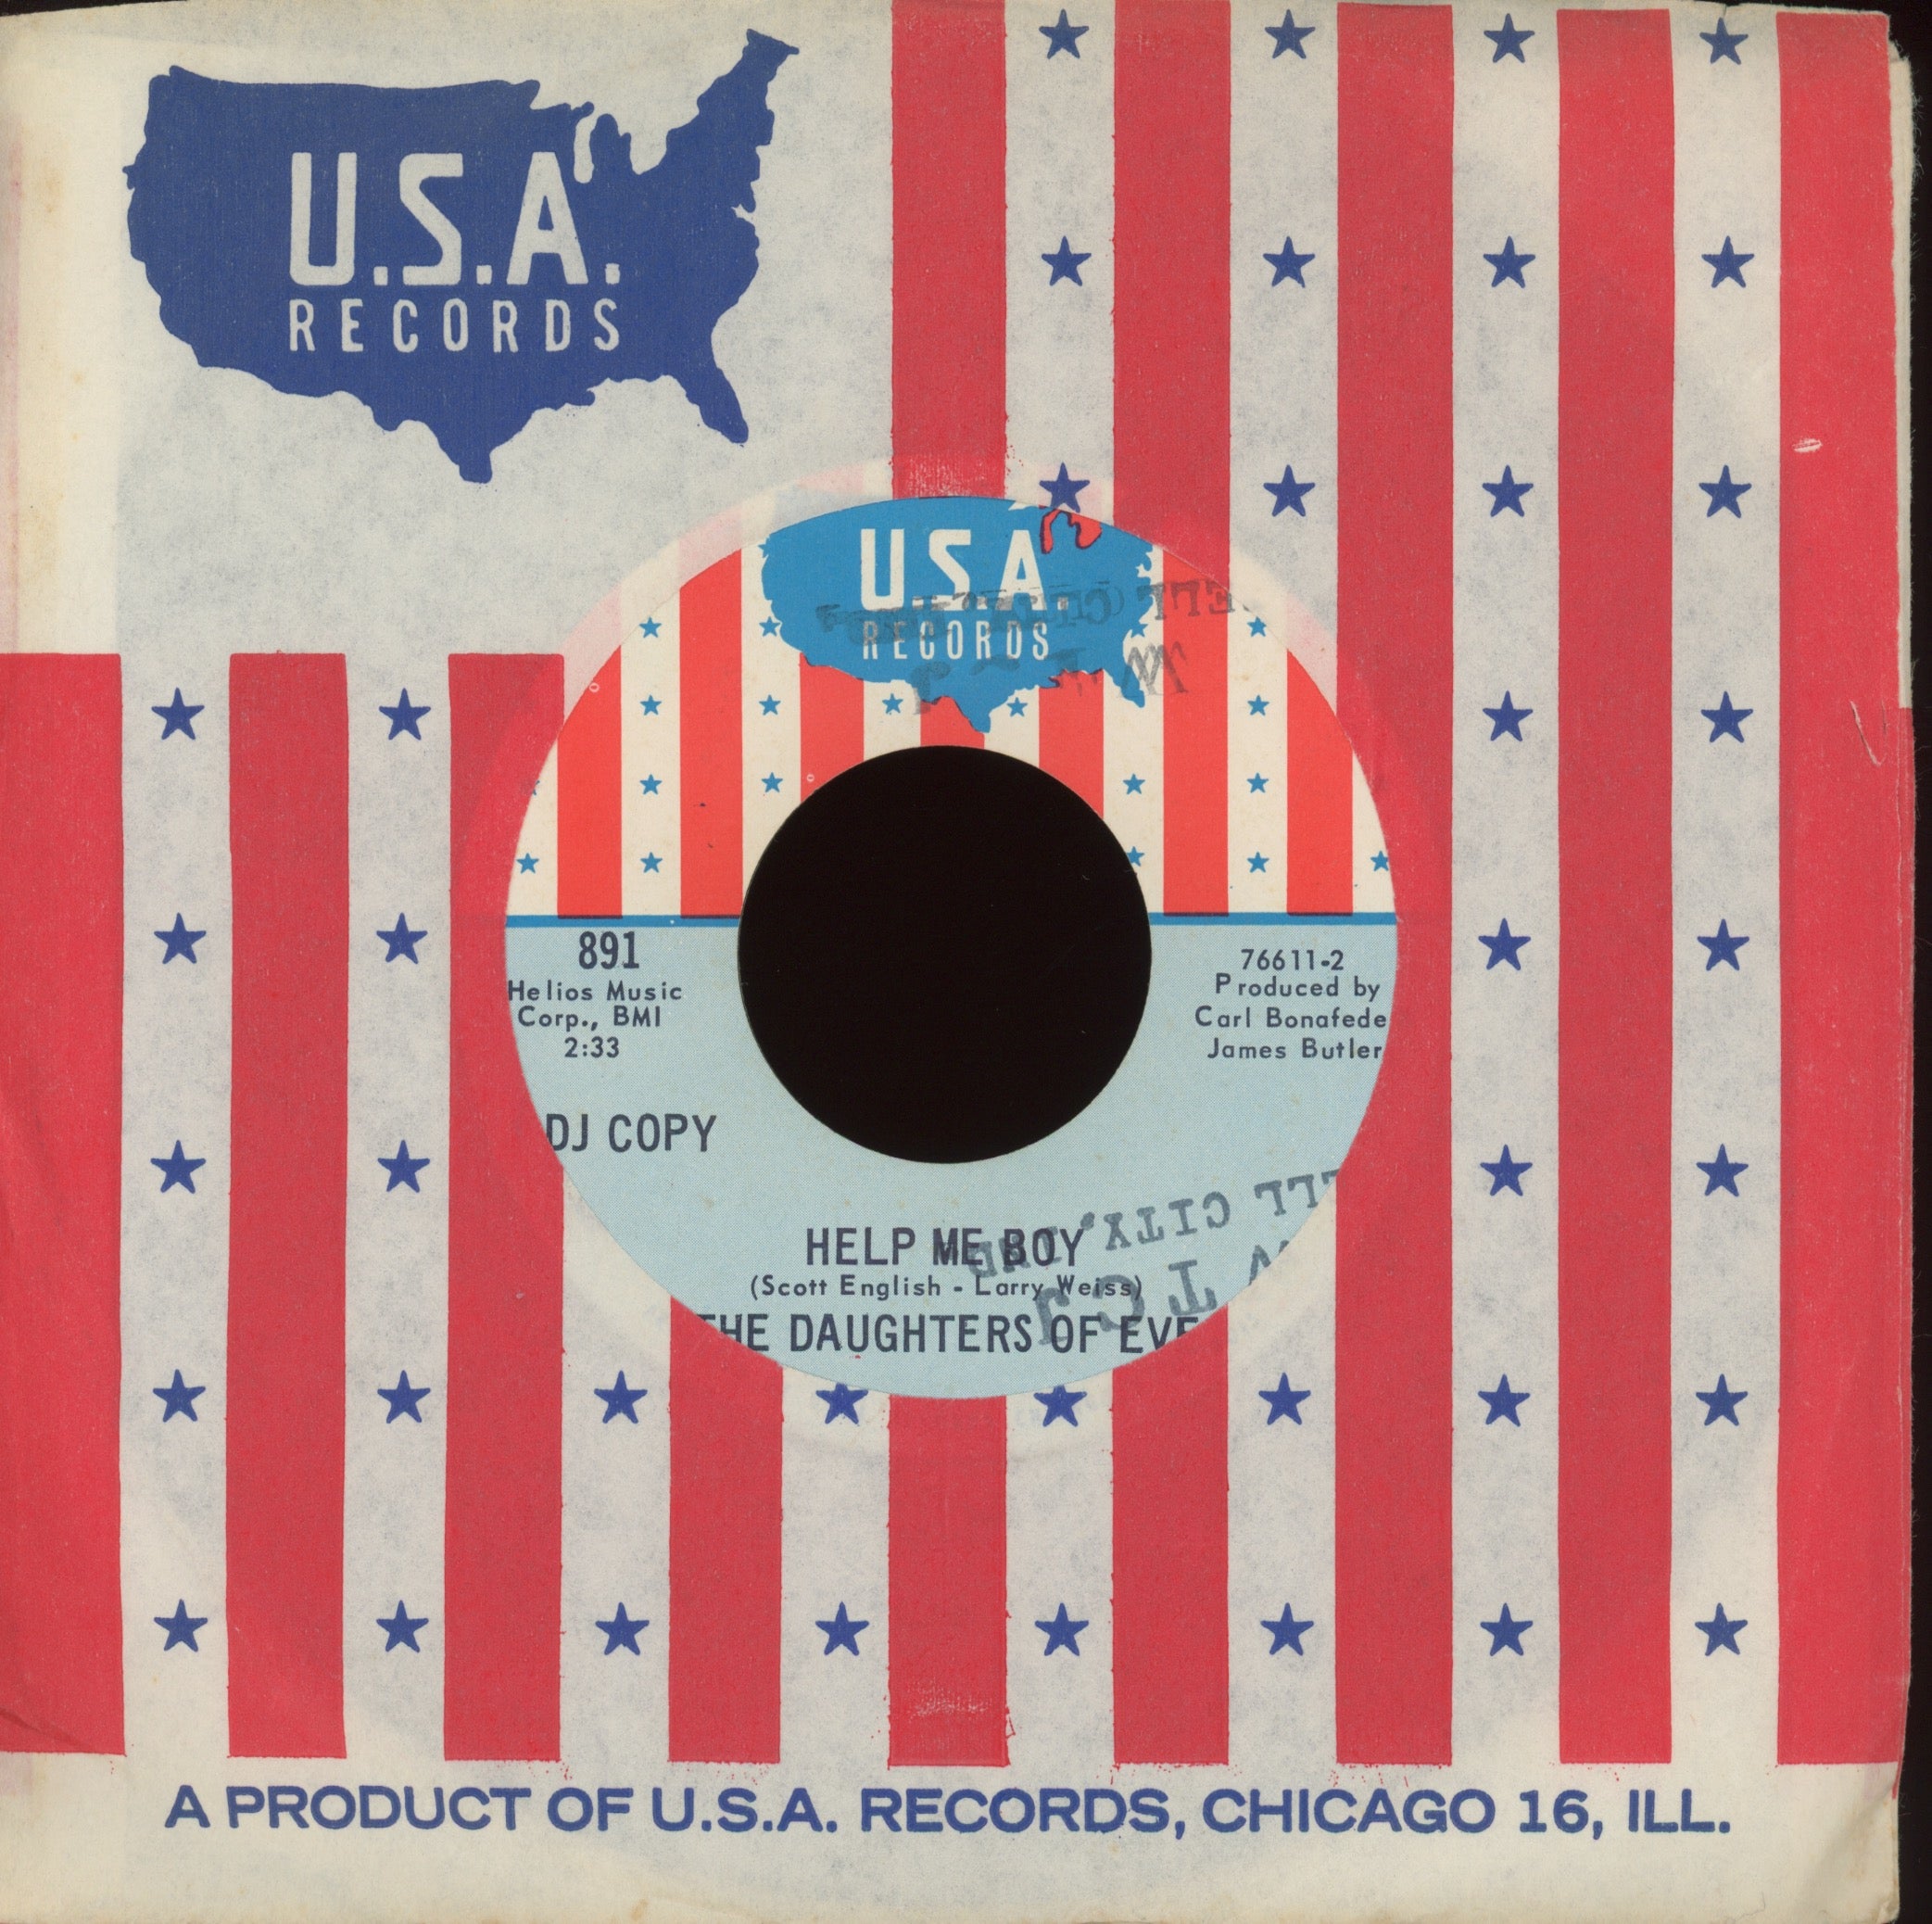 The Daughters Of Eve - Symphony Of Soul on U.S.A. Promo Northern Soul 45